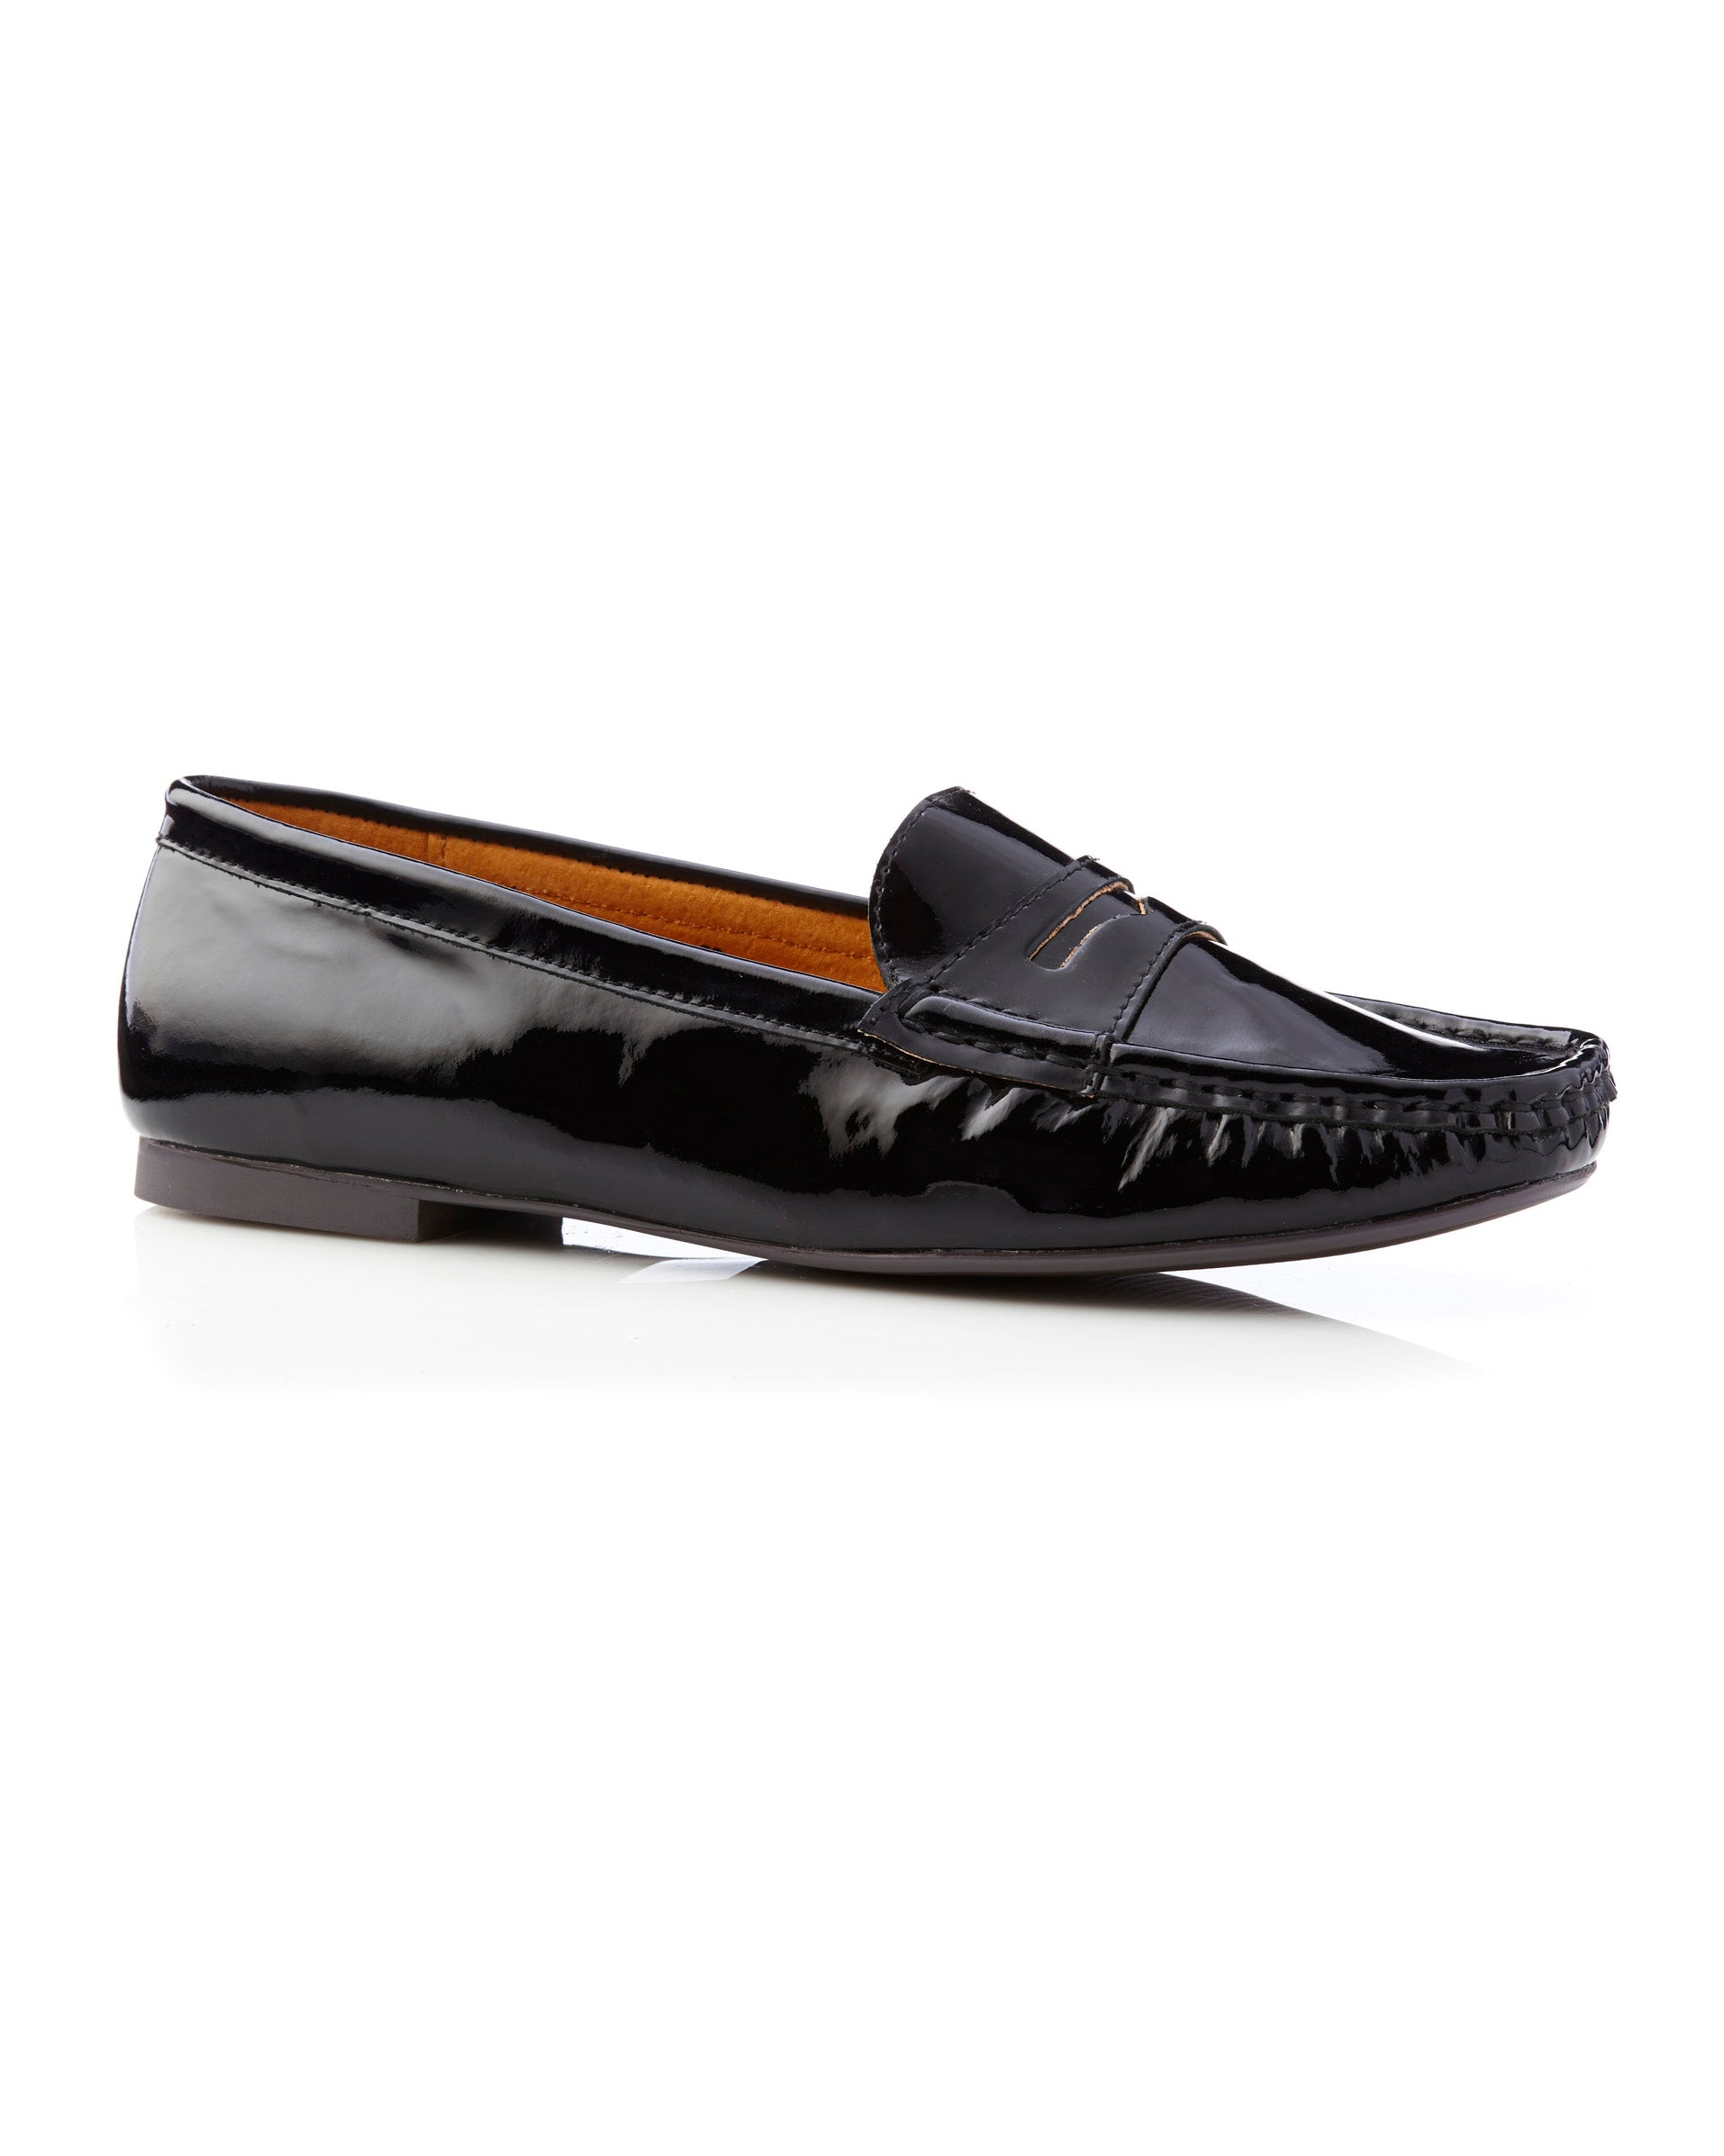 Classic Loafer Patent Black Side